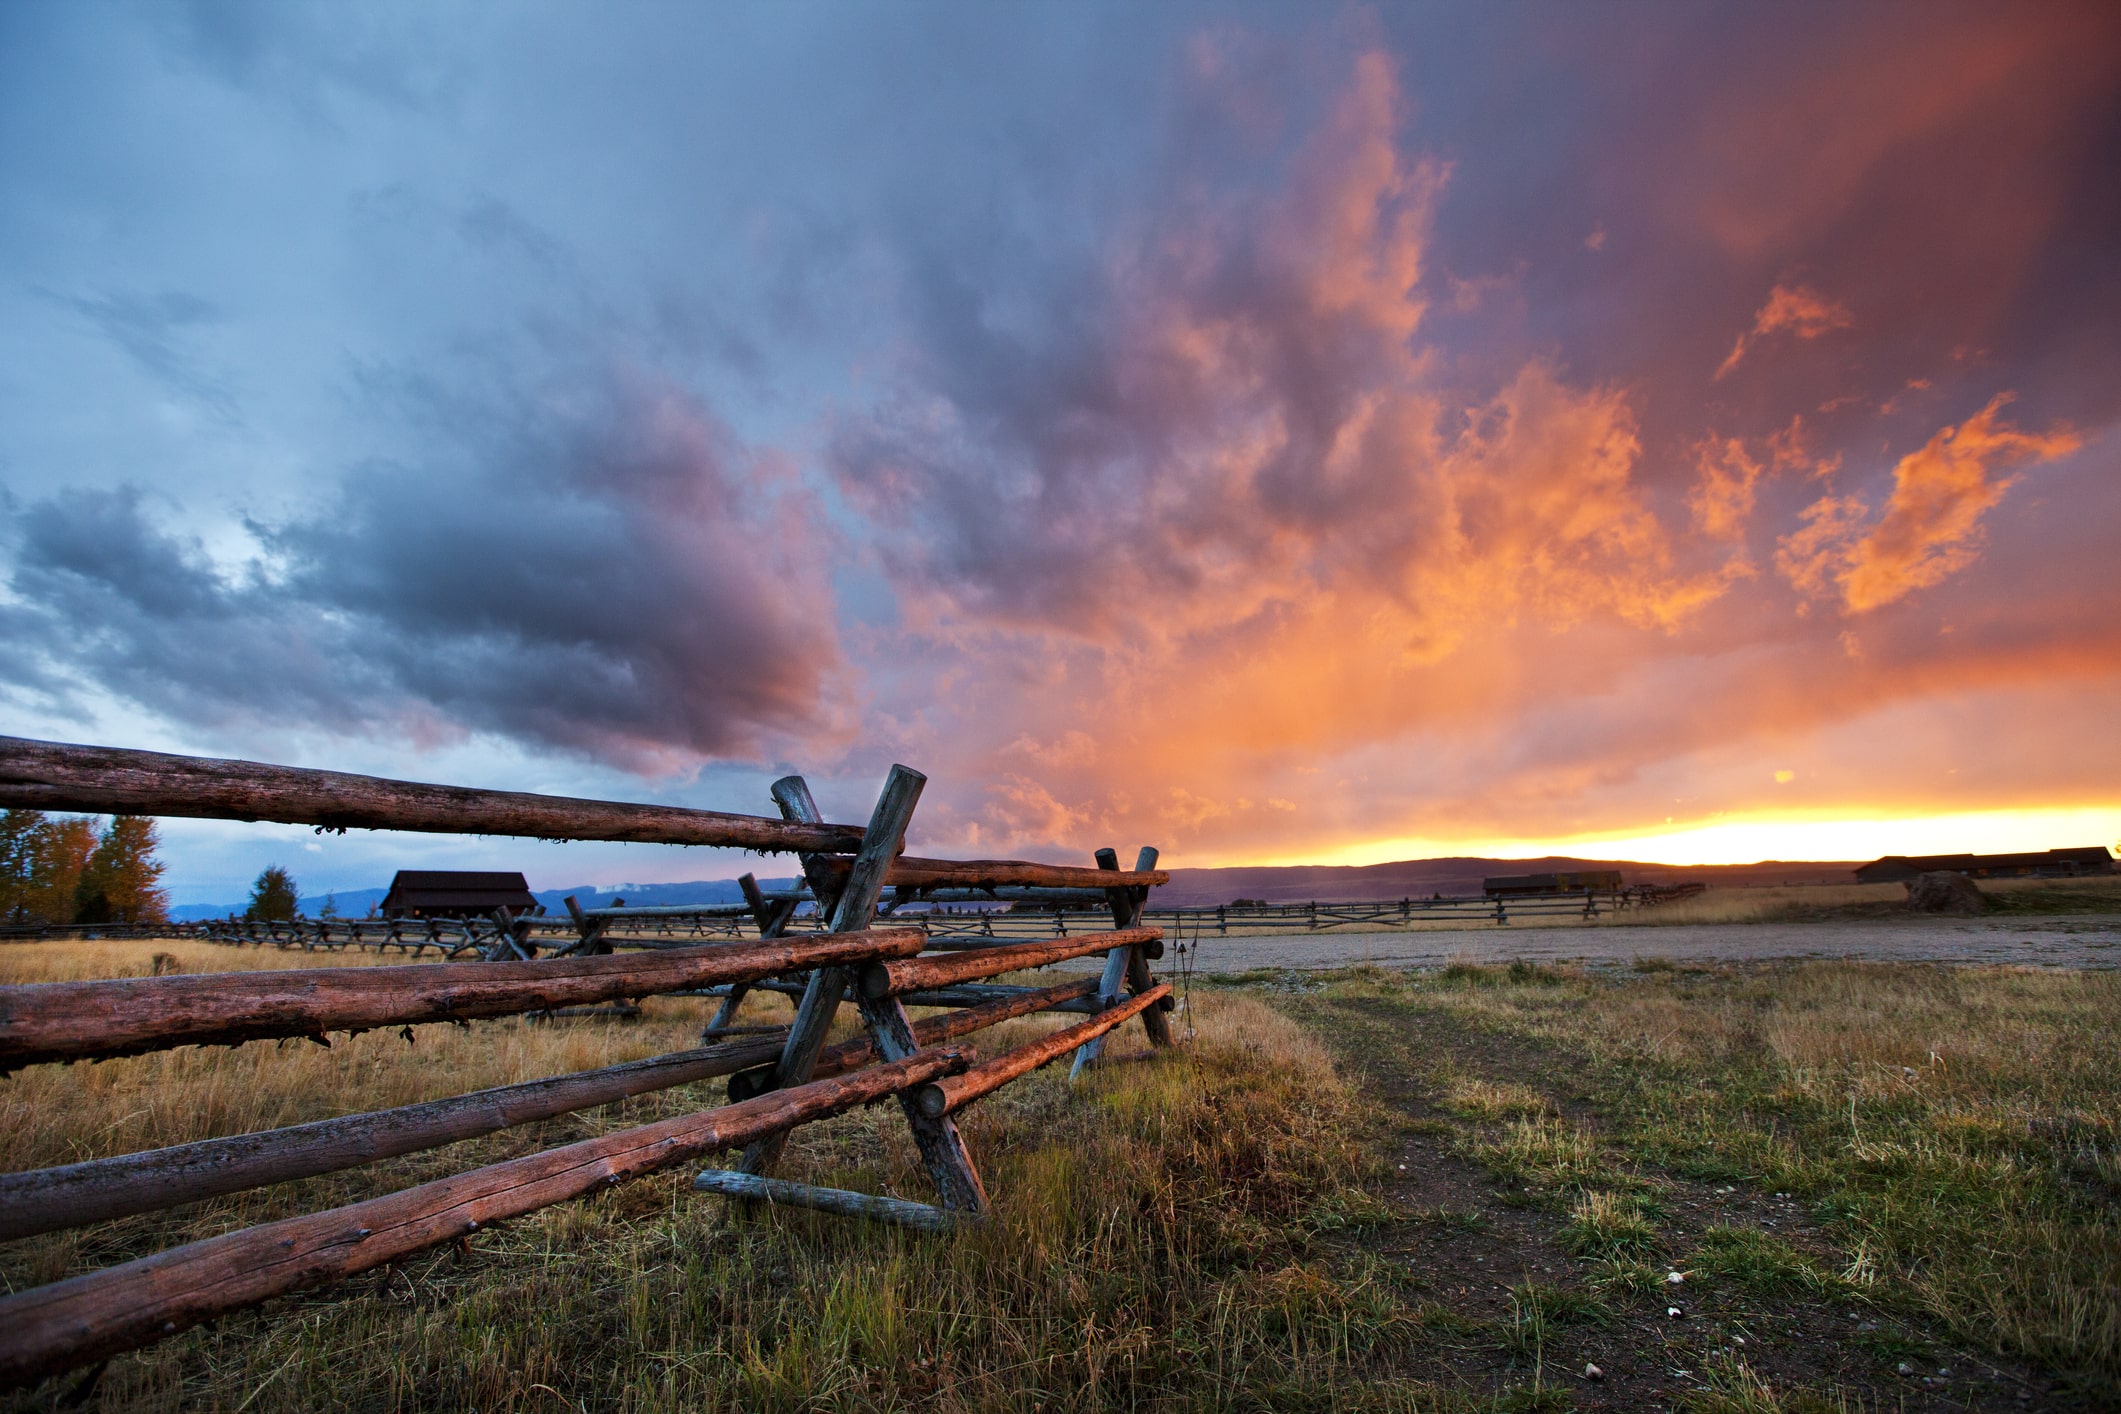 Sun setting over a ranch fence in Idaho.